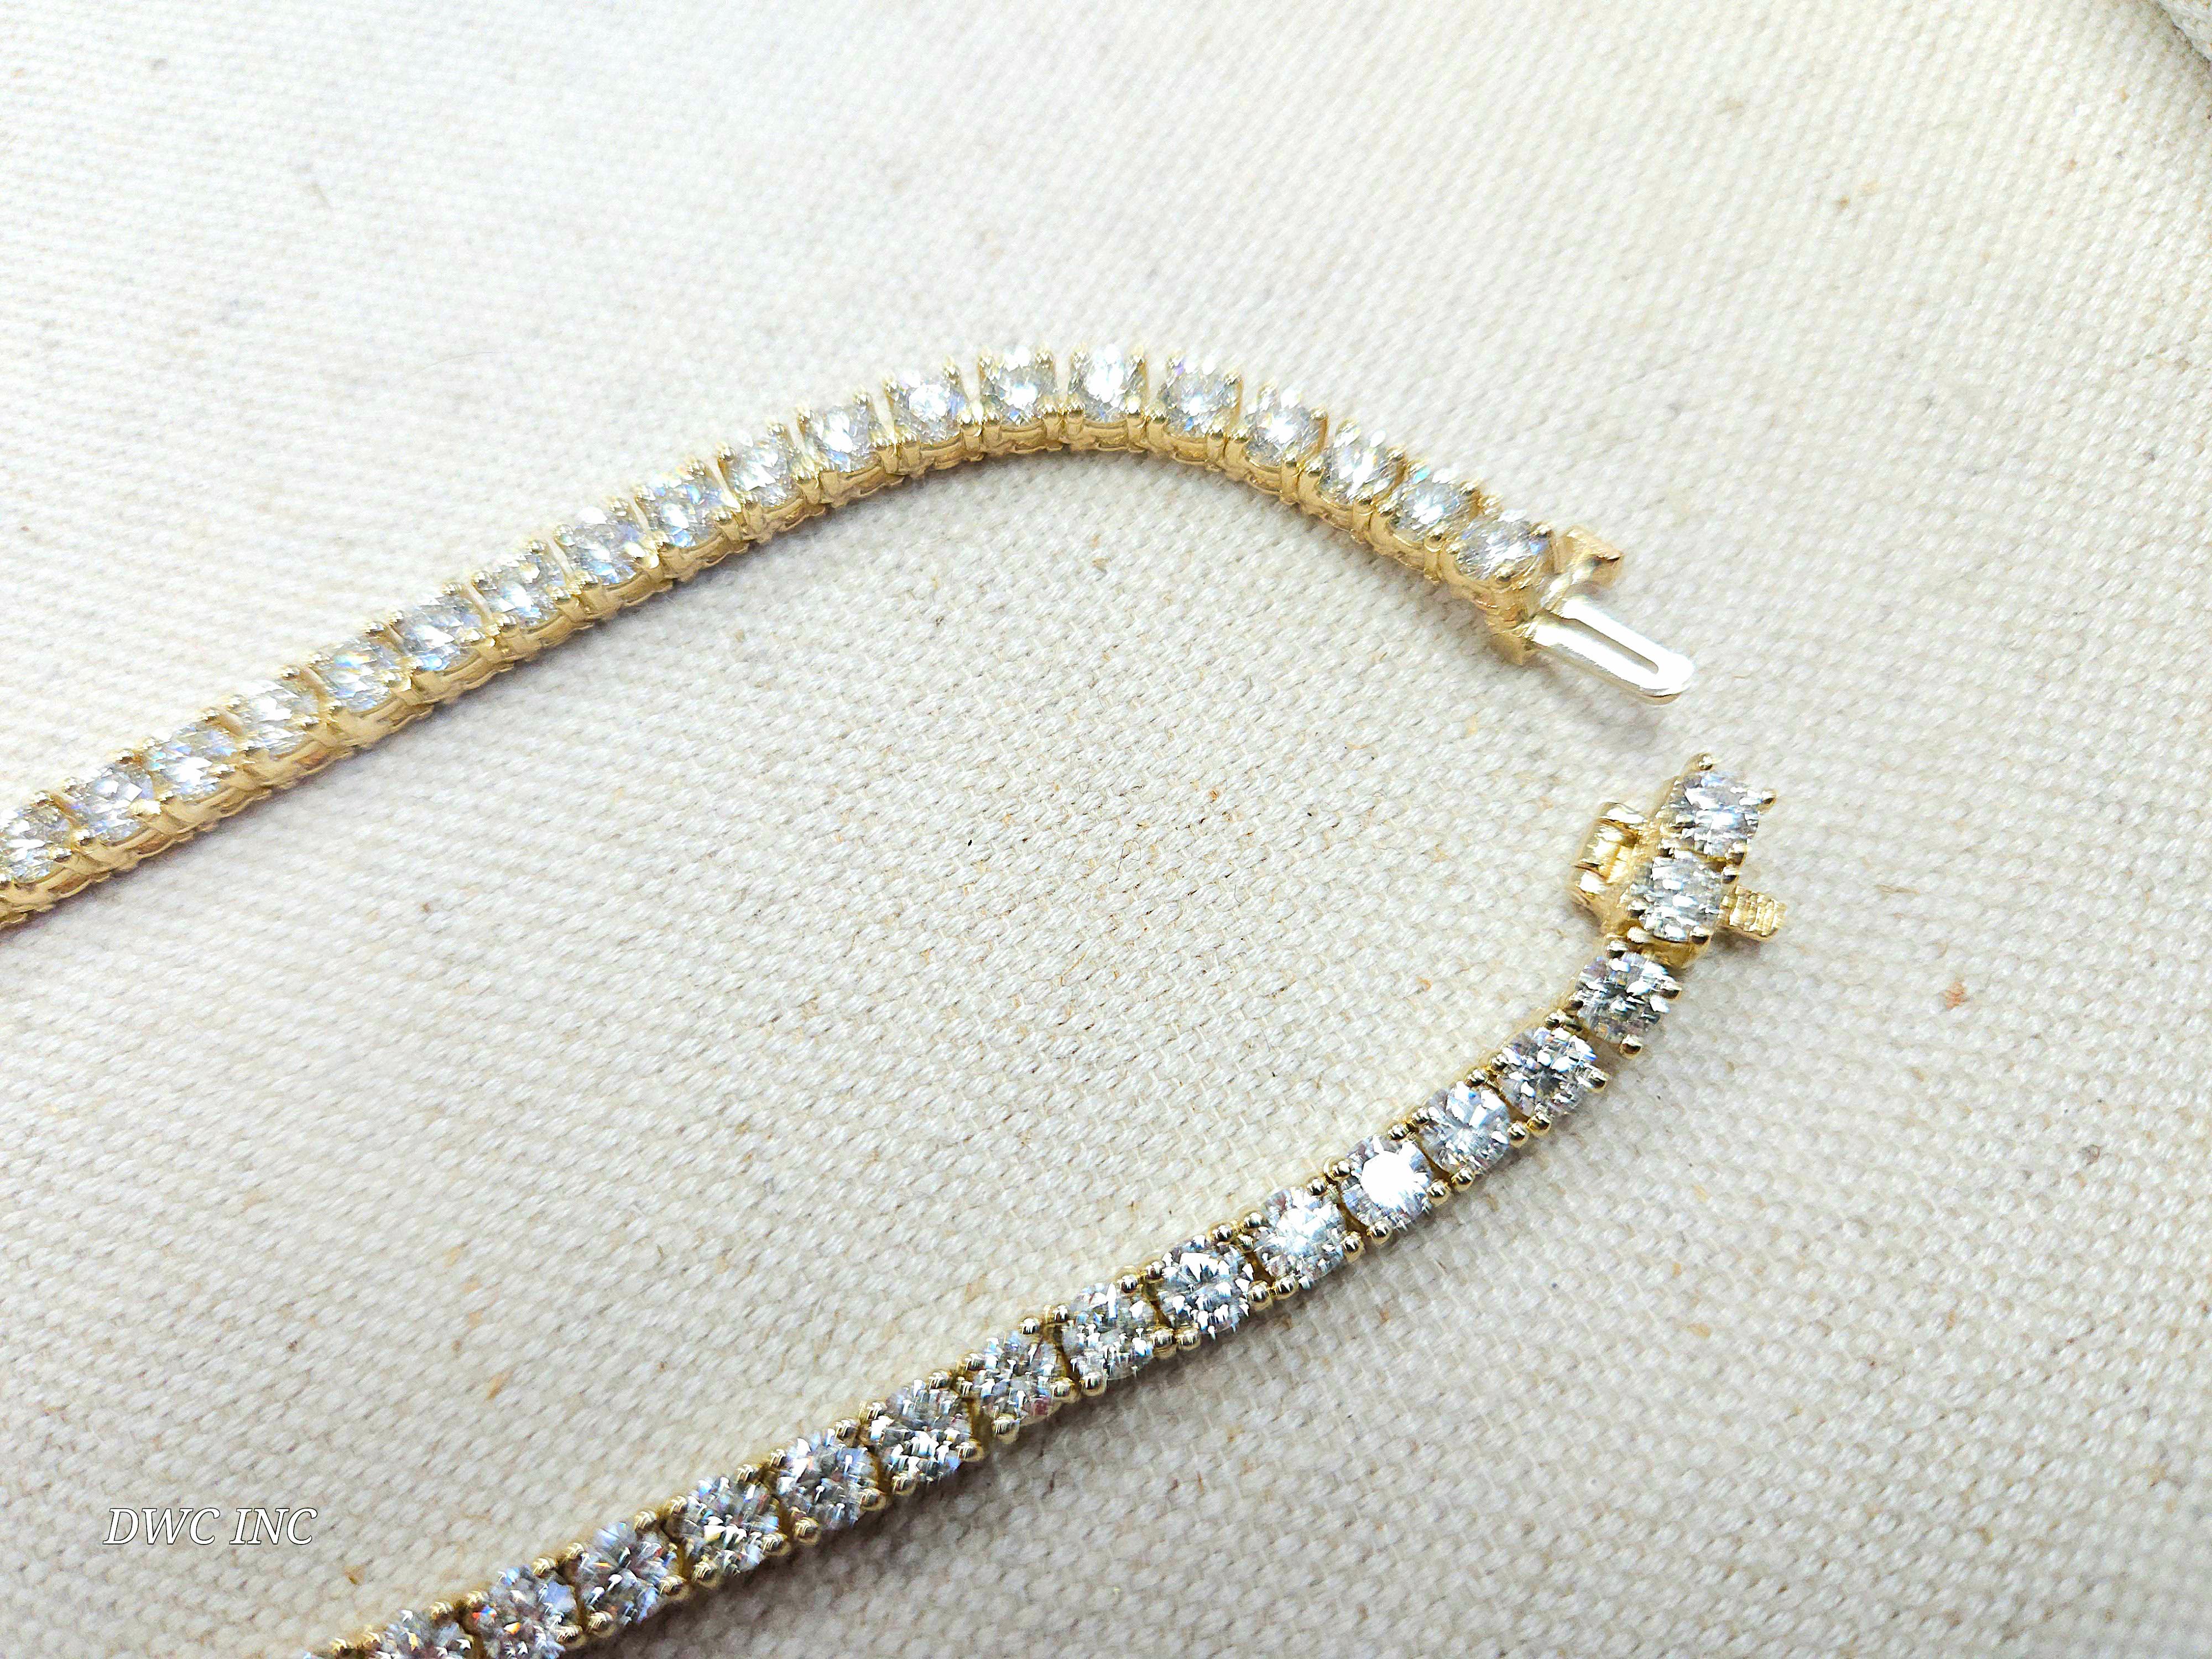 High beautiful quality tennis necklace, round-brilliant cut white diamonds clean and Excellent shine. 
14k yellow gold classic four-prong style for maximum light brilliance. 
18 inch length. Average Color H, Clarity VVS-VS 30.96 gram

Free shipping